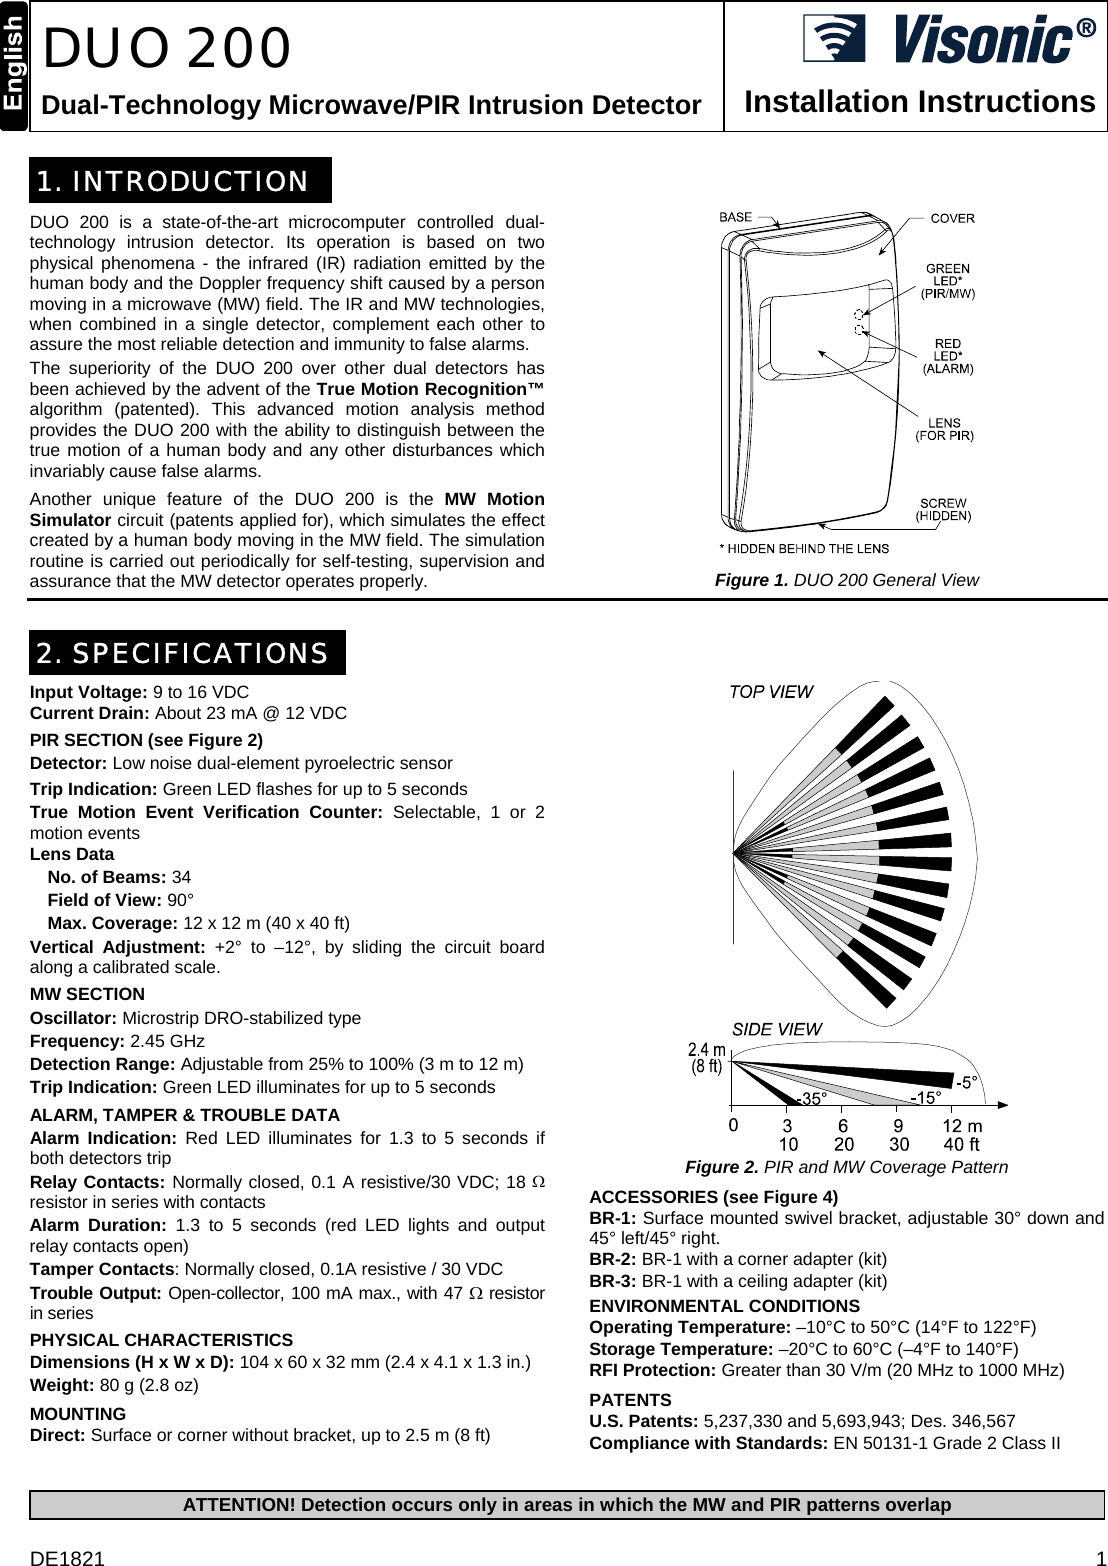 DE1821  1  DUO 200 Dual-Technology Microwave/PIR Intrusion Detector  Installation Instructions 1. INTRODUCTION DUO 200 is a state-of-the-art microcomputer controlled dual- technology intrusion detector. Its operation is based on two physical phenomena - the infrared (IR) radiation emitted by the human body and the Doppler frequency shift caused by a person moving in a microwave (MW) field. The IR and MW technologies, when combined in a single detector, complement each other to assure the most reliable detection and immunity to false alarms. The superiority of the DUO 200 over other dual detectors has been achieved by the advent of the True Motion Recognition™ algorithm (patented). This advanced motion analysis method provides the DUO 200 with the ability to distinguish between the true motion of a human body and any other disturbances which invariably cause false alarms. Another unique feature of the DUO 200 is the MW Motion Simulator circuit (patents applied for), which simulates the effect created by a human body moving in the MW field. The simulation routine is carried out periodically for self-testing, supervision and assurance that the MW detector operates properly.  Figure 1. DUO 200 General View  2. SPECIFICATIONS Input Voltage: 9 to 16 VDC Current Drain: About 23 mA @ 12 VDC  PIR SECTION (see Figure 2) Detector: Low noise dual-element pyroelectric sensor Trip Indication: Green LED flashes for up to 5 seconds True Motion Event Verification Counter: Selectable, 1 or 2 motion events Lens Data   No. of Beams: 34   Field of View: 90°  Max. Coverage: 12 x 12 m (40 x 40 ft) Vertical Adjustment: +2° to –12°, by sliding the circuit board along a calibrated scale. MW SECTION Oscillator: Microstrip DRO-stabilized type Frequency: 2.45 GHz Detection Range: Adjustable from 25% to 100% (3 m to 12 m) Trip Indication: Green LED illuminates for up to 5 seconds ALARM, TAMPER &amp; TROUBLE DATA Alarm Indication: Red LED illuminates for 1.3 to 5 seconds if both detectors trip Relay Contacts: Normally closed, 0.1 A resistive/30 VDC; 18 Ω resistor in series with contacts Alarm Duration: 1.3 to 5 seconds (red LED lights and output relay contacts open) Tamper Contacts: Normally closed, 0.1A resistive / 30 VDC Trouble Output: Open-collector, 100 mA max., with 47 Ω resistor in series  PHYSICAL CHARACTERISTICS Dimensions (H x W x D): 104 x 60 x 32 mm (2.4 x 4.1 x 1.3 in.) Weight: 80 g (2.8 oz) MOUNTING Direct: Surface or corner without bracket, up to 2.5 m (8 ft)  Figure 2. PIR and MW Coverage Pattern  ACCESSORIES (see Figure 4) BR-1: Surface mounted swivel bracket, adjustable 30° down and 45° left/45° right.  BR-2: BR-1 with a corner adapter (kit) BR-3: BR-1 with a ceiling adapter (kit) ENVIRONMENTAL CONDITIONS Operating Temperature: –10°C to 50°C (14°F to 122°F) Storage Temperature: –20°C to 60°C (–4°F to 140°F) RFI Protection: Greater than 30 V/m (20 MHz to 1000 MHz) PATENTS U.S. Patents: 5,237,330 and 5,693,943; Des. 346,567 Compliance with Standards: EN 50131-1 Grade 2 Class II  ATTENTION! Detection occurs only in areas in which the MW and PIR patterns overlap  